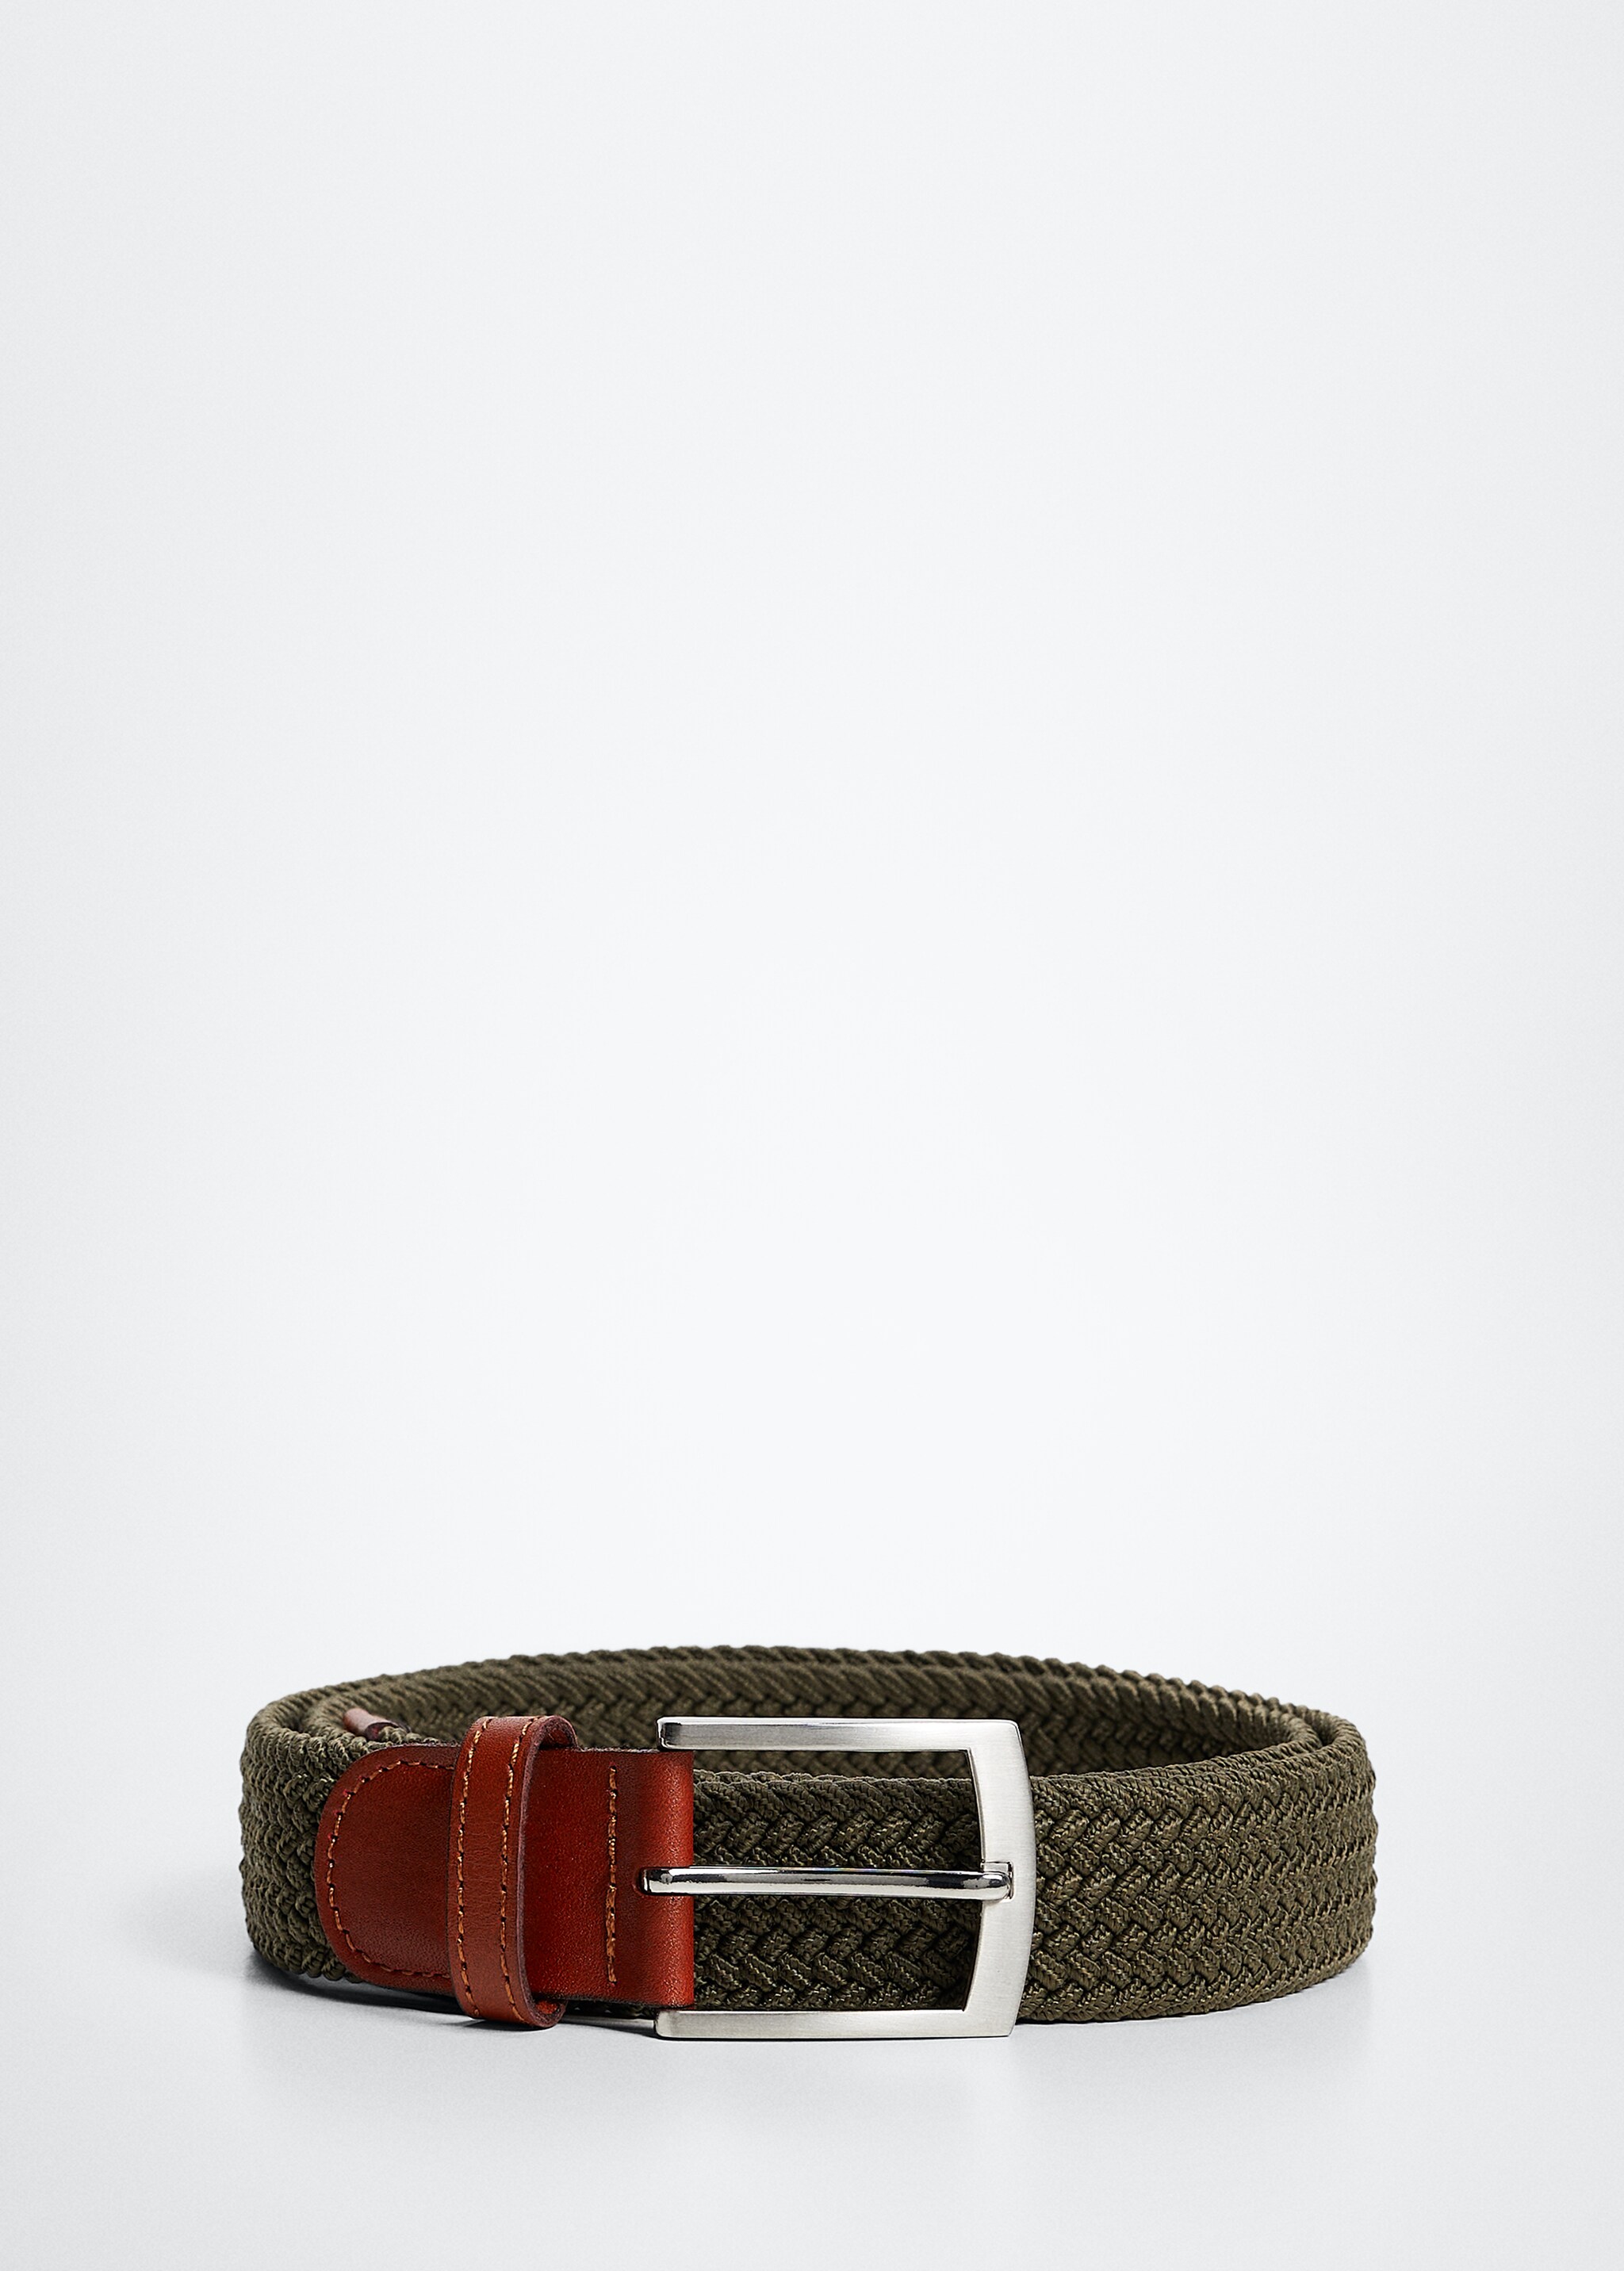 Braided elastic belt - Article without model